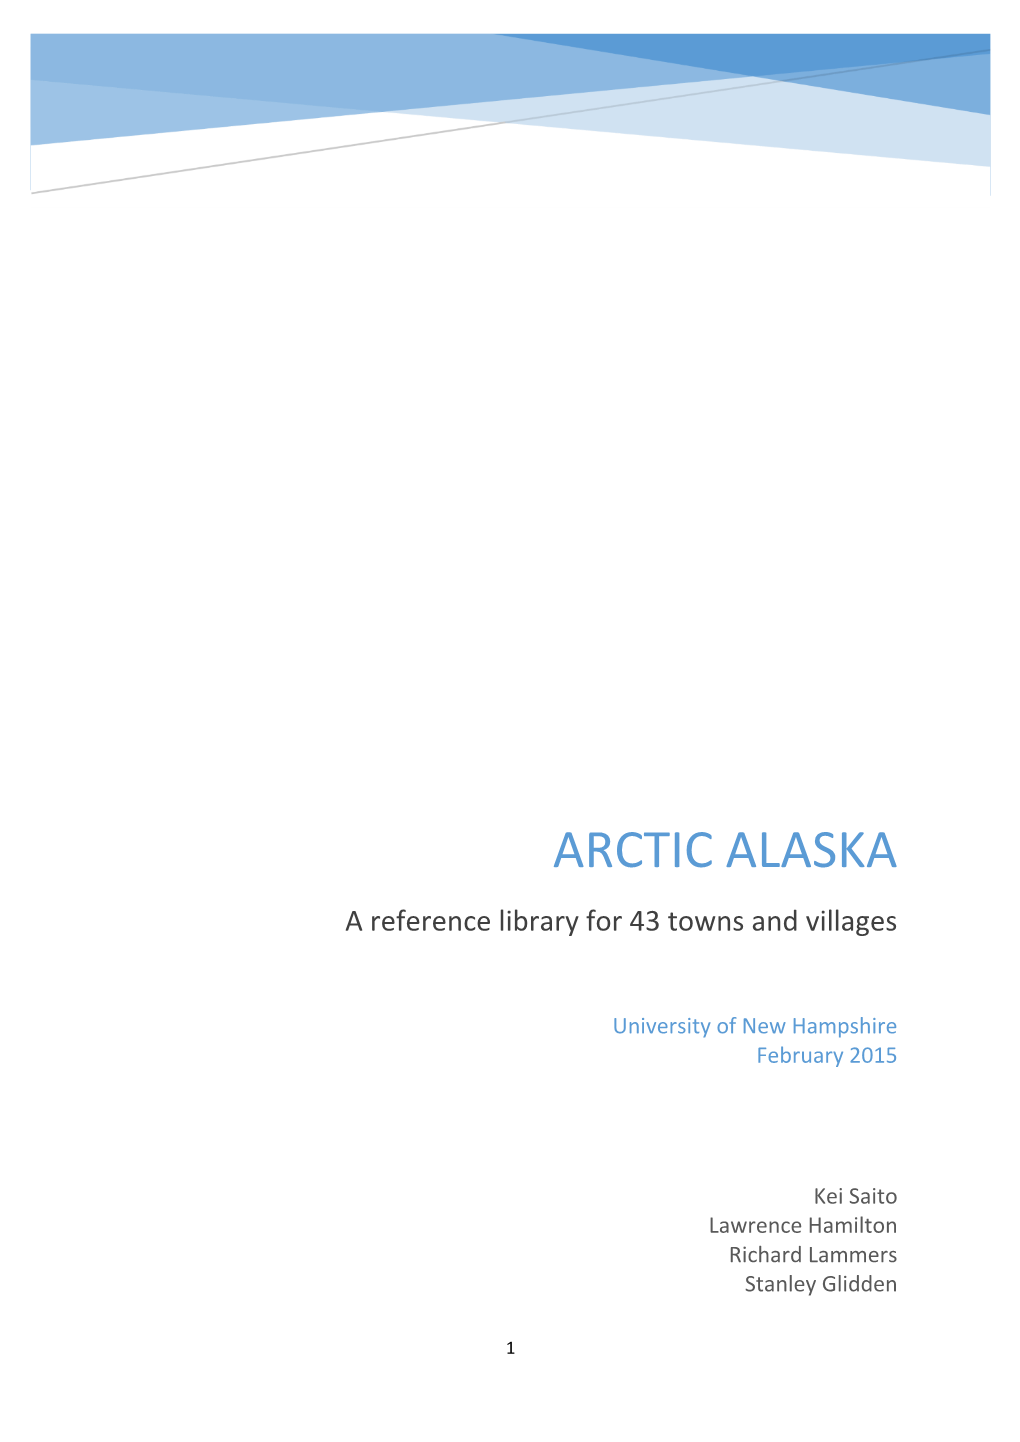 ARCTIC ALASKA a Reference Library for 43 Towns and Villages